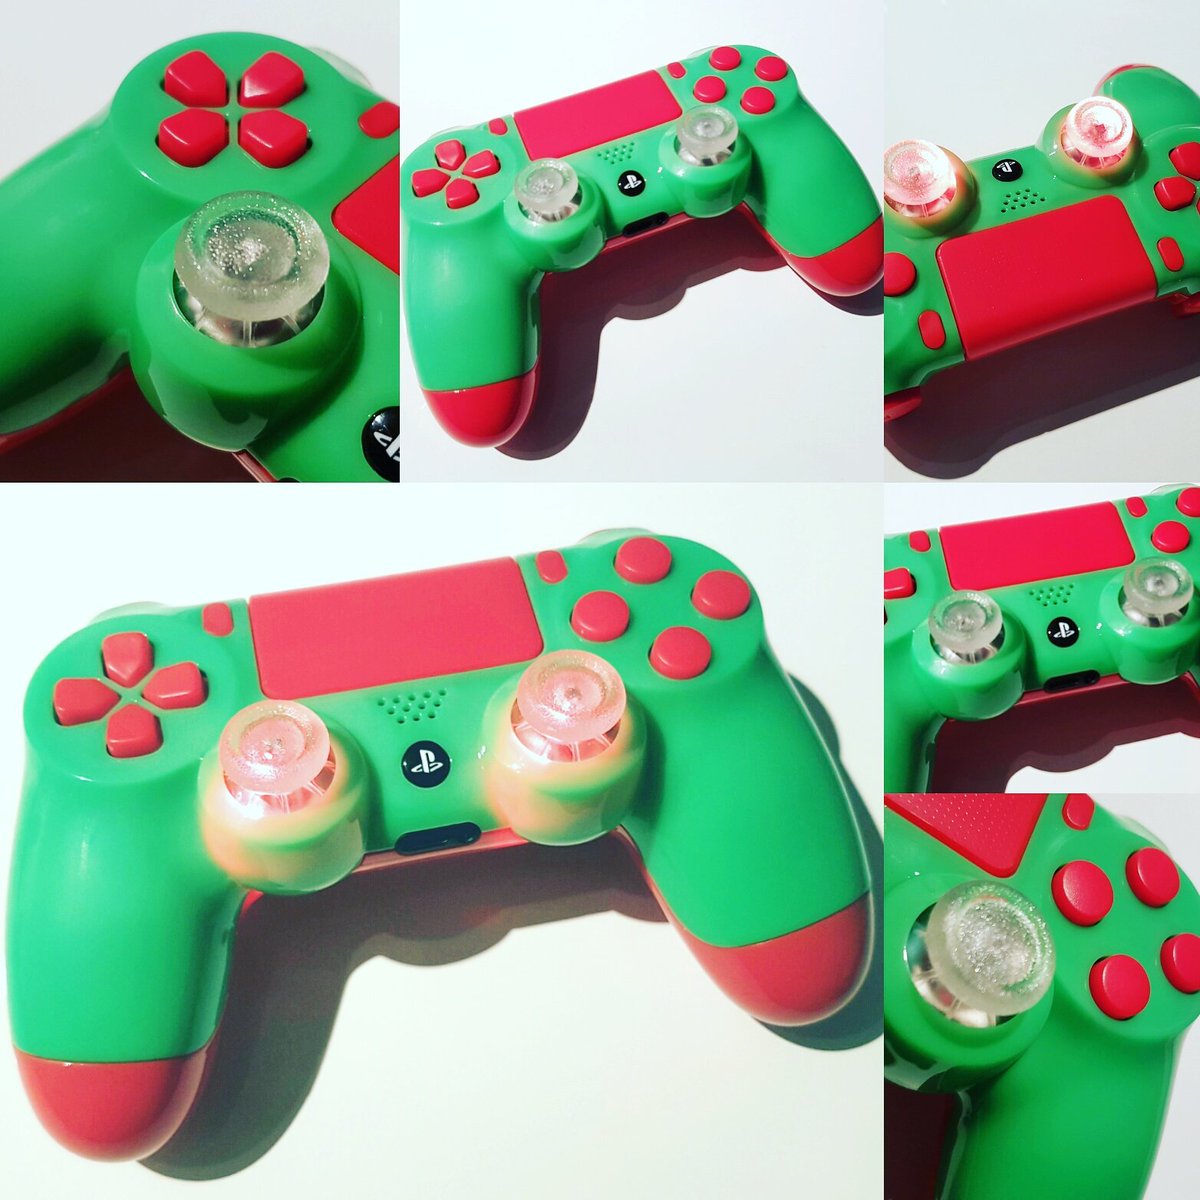 Tru Modz On Twitter Ps4 Controller Portugal Edt Portugal Green Red Custom Ps4 Led Trumodz Ps4controller Customcontroller